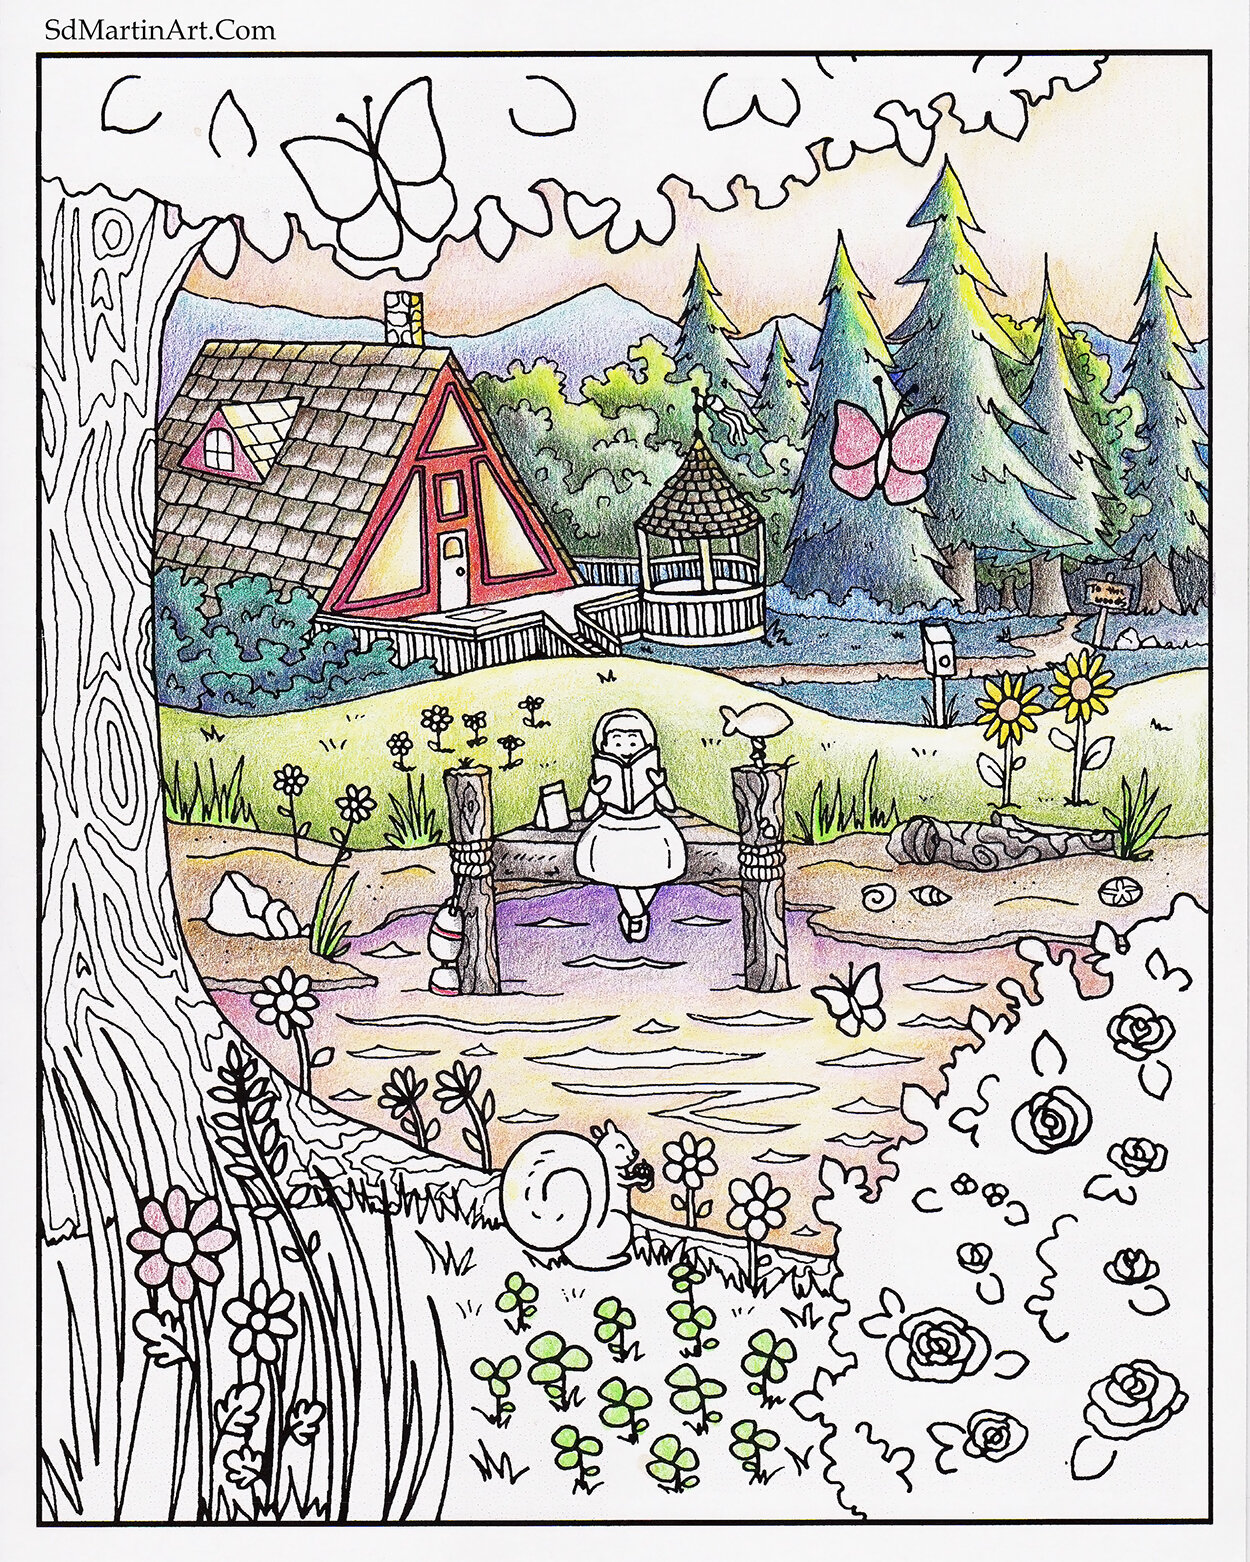 Free Coloring Page_A Frame Cottage_Coloring Progress 3 _color scan_Edited LR with WM.jpg